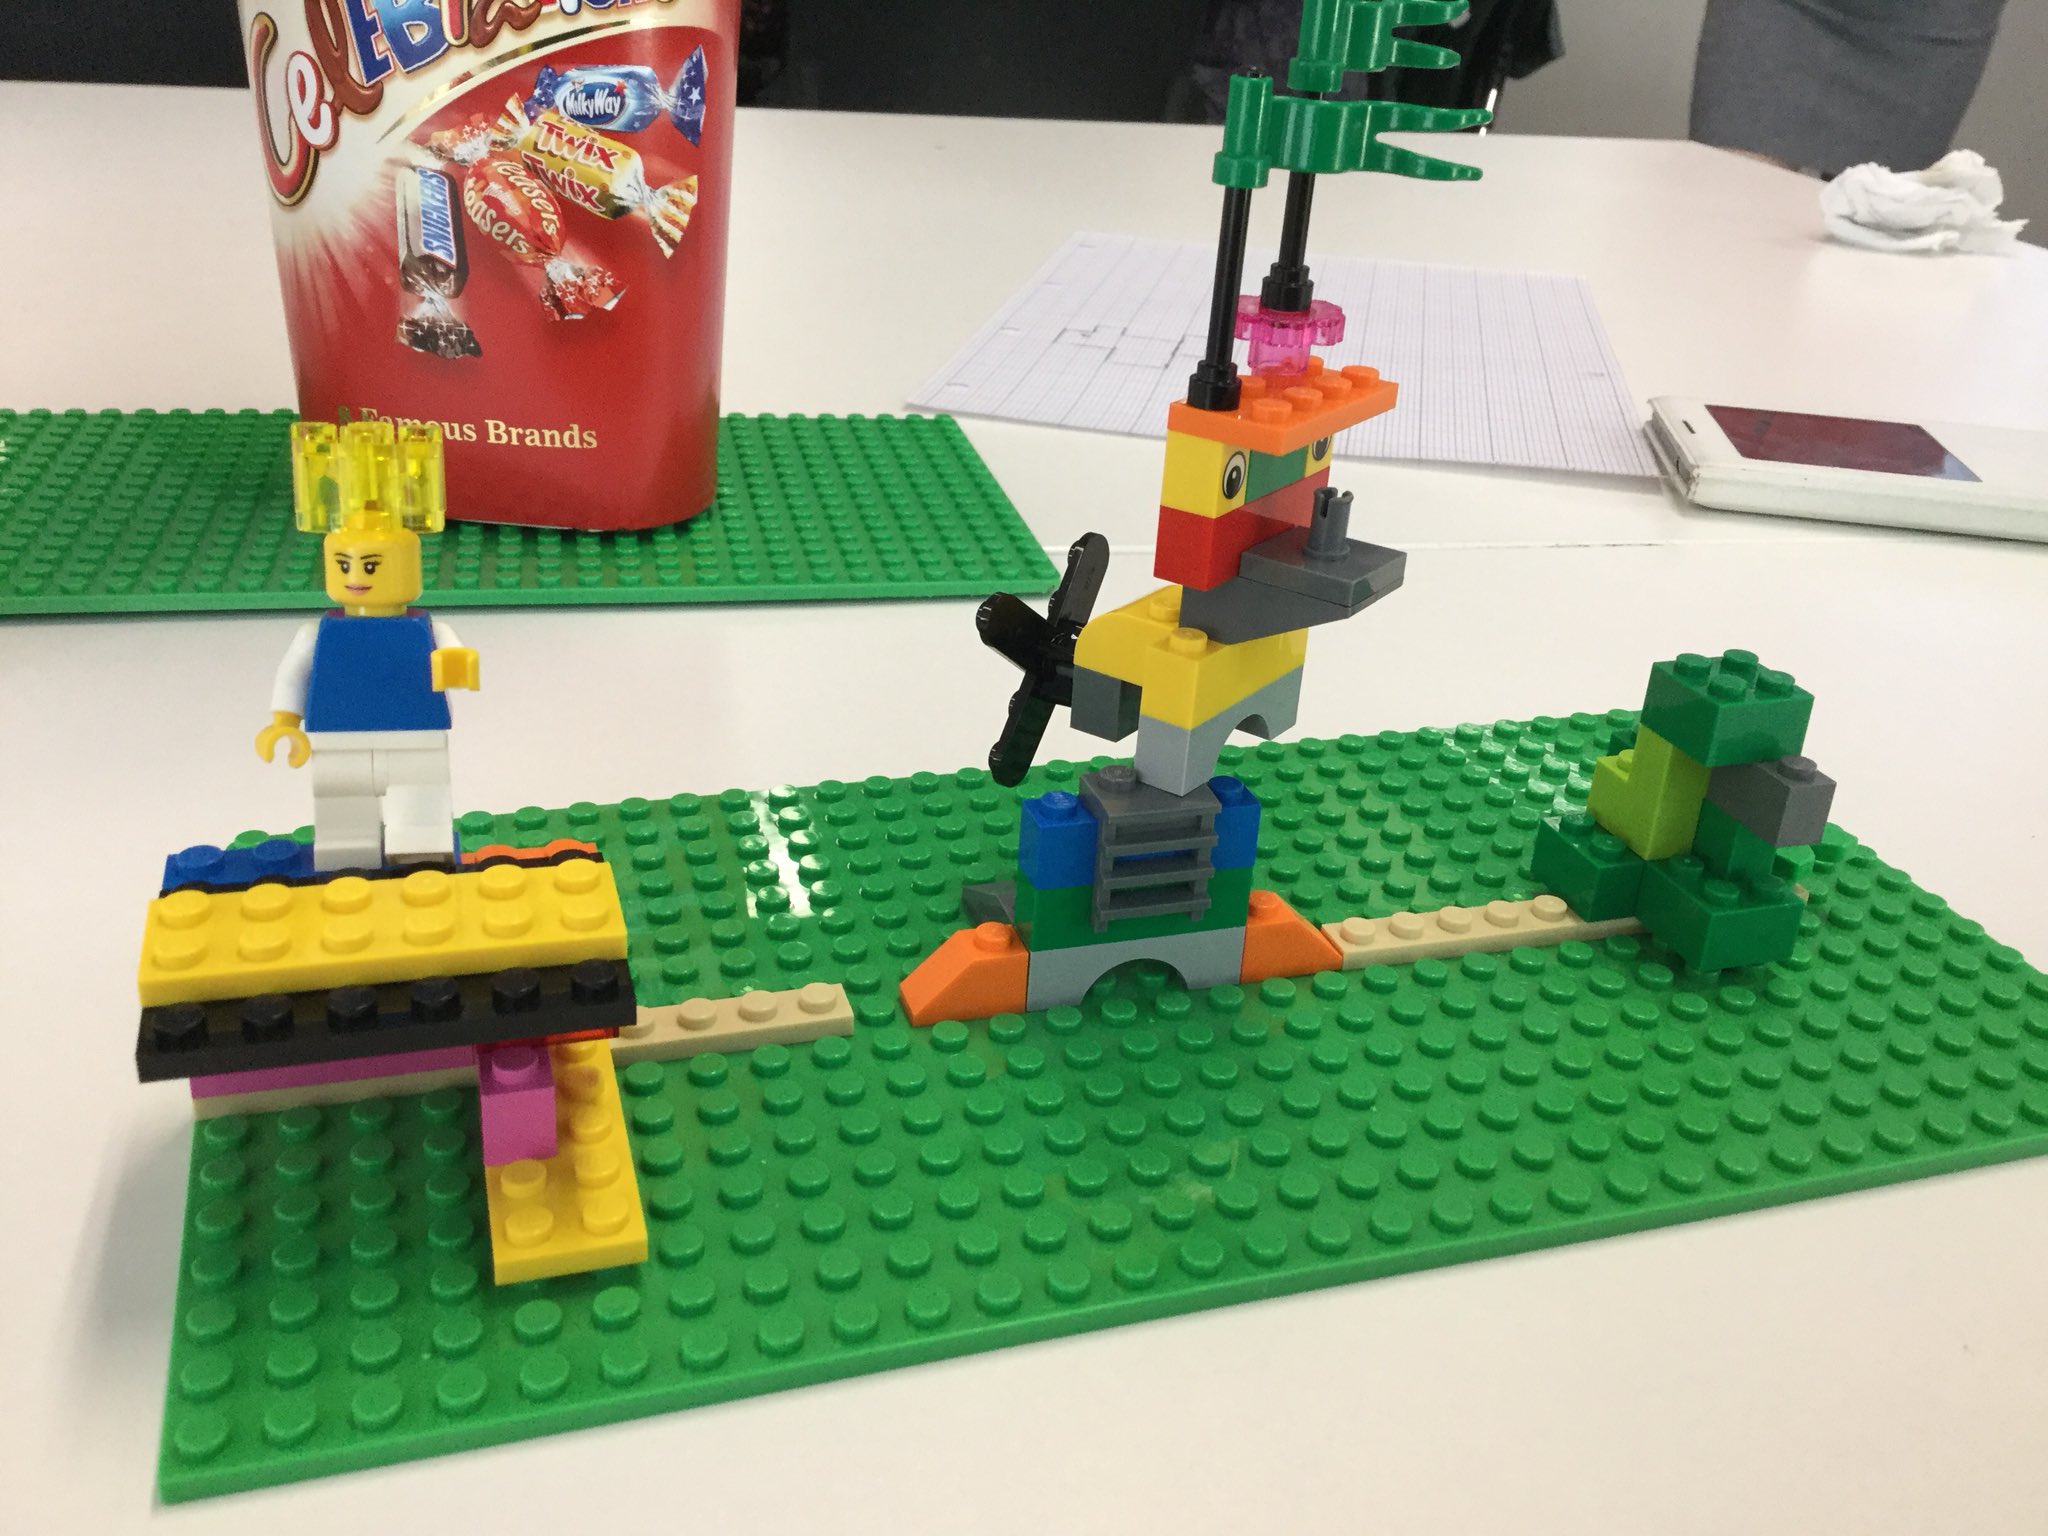 Creating the Careers online persona in a self explanatory  lego model #SocMedHE17 https://t.co/omkDtSR8Sm